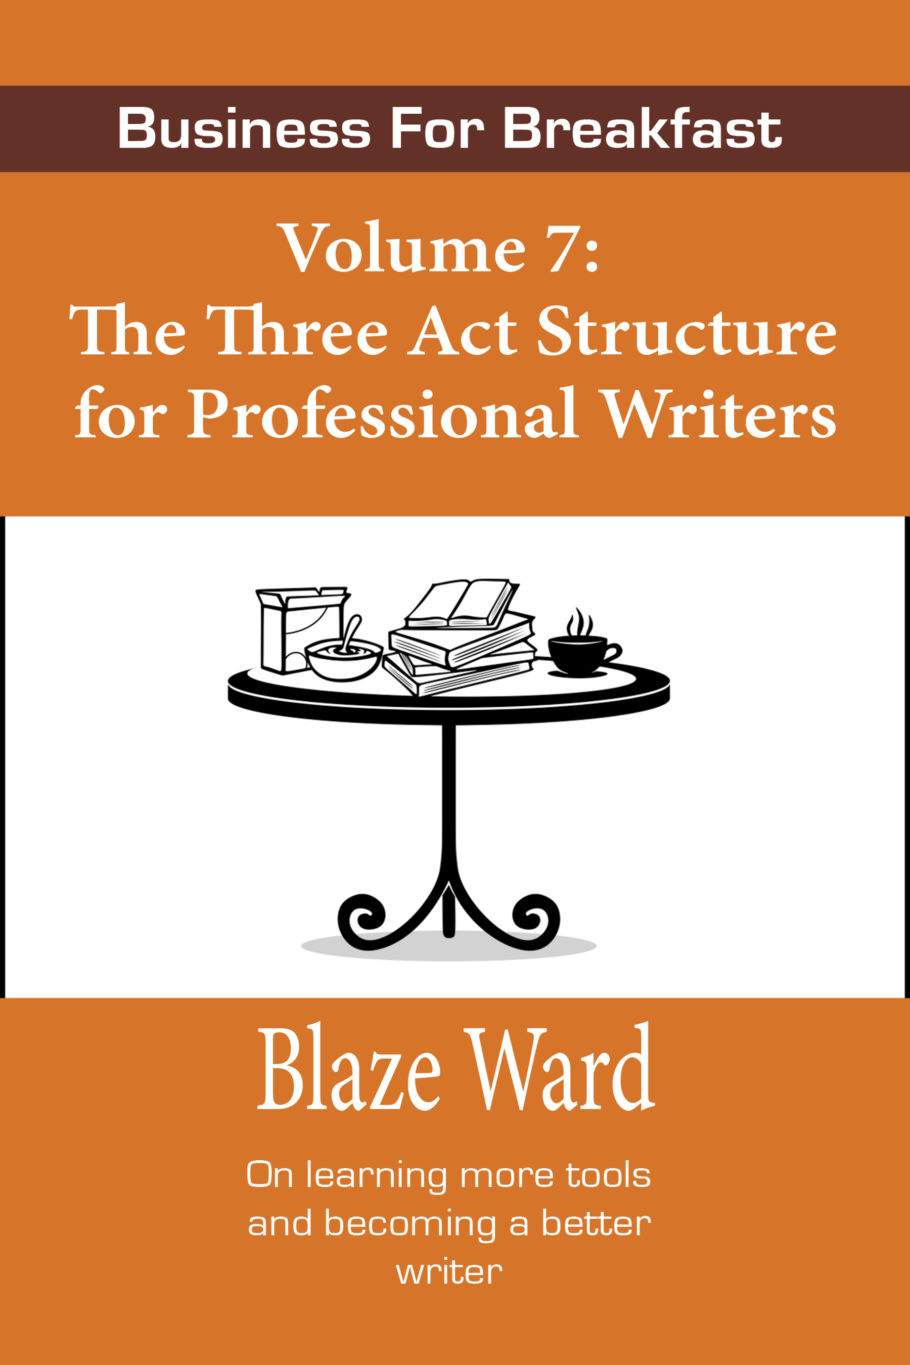 Book Cover: The Three Act Structure for Professional Writers